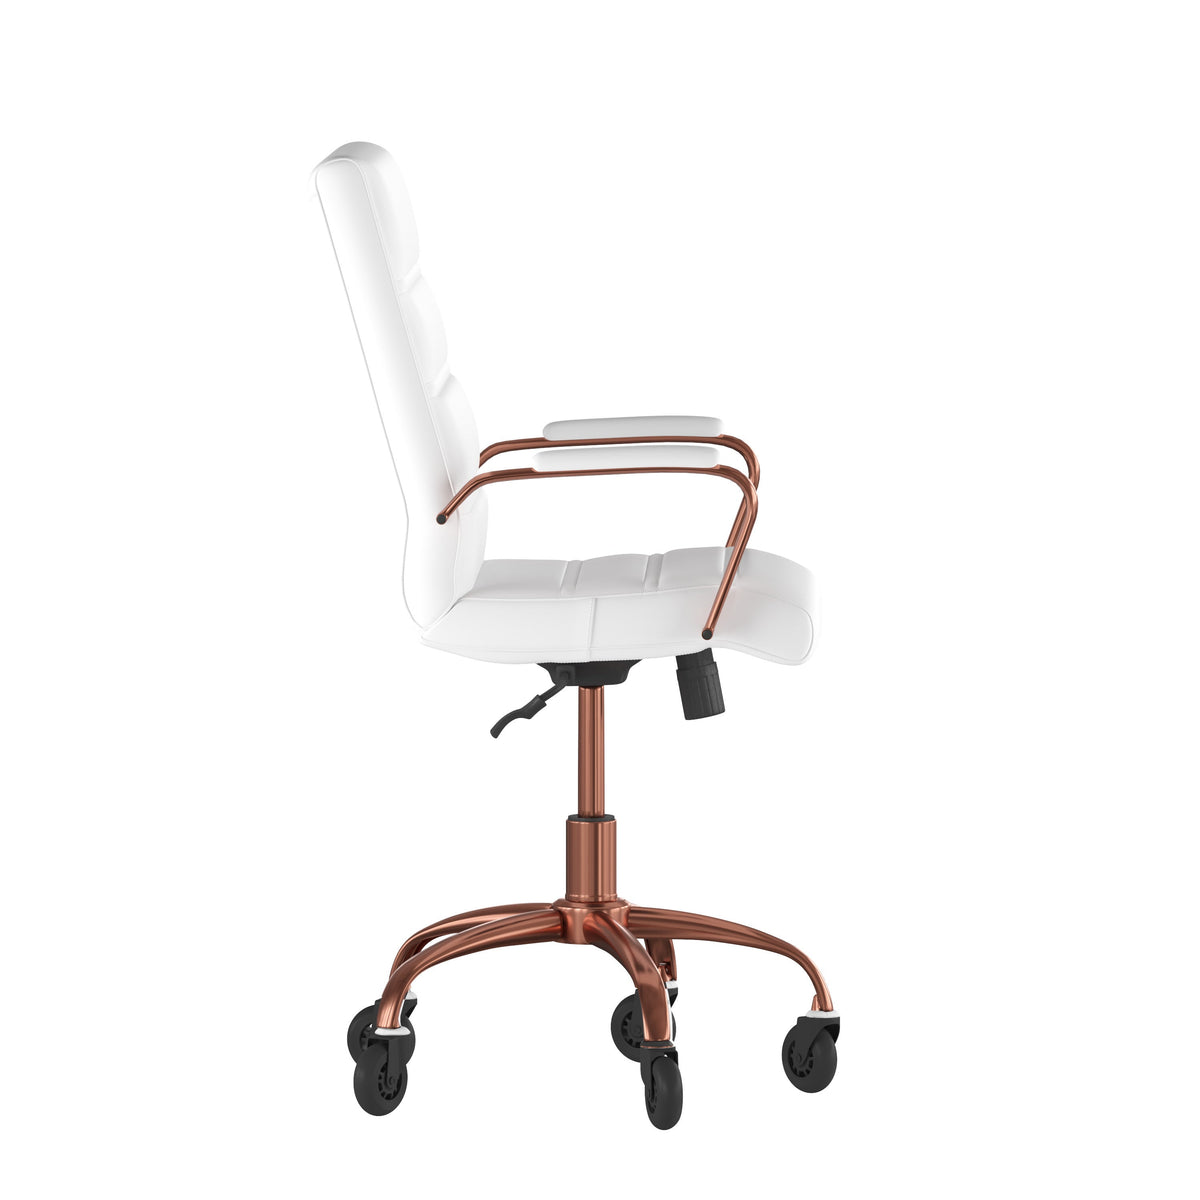 White LeatherSoft/Rose Gold Frame |#| Executive Chair with Rose Gold Frame & Arms on Skate Wheels - White LeatherSoft